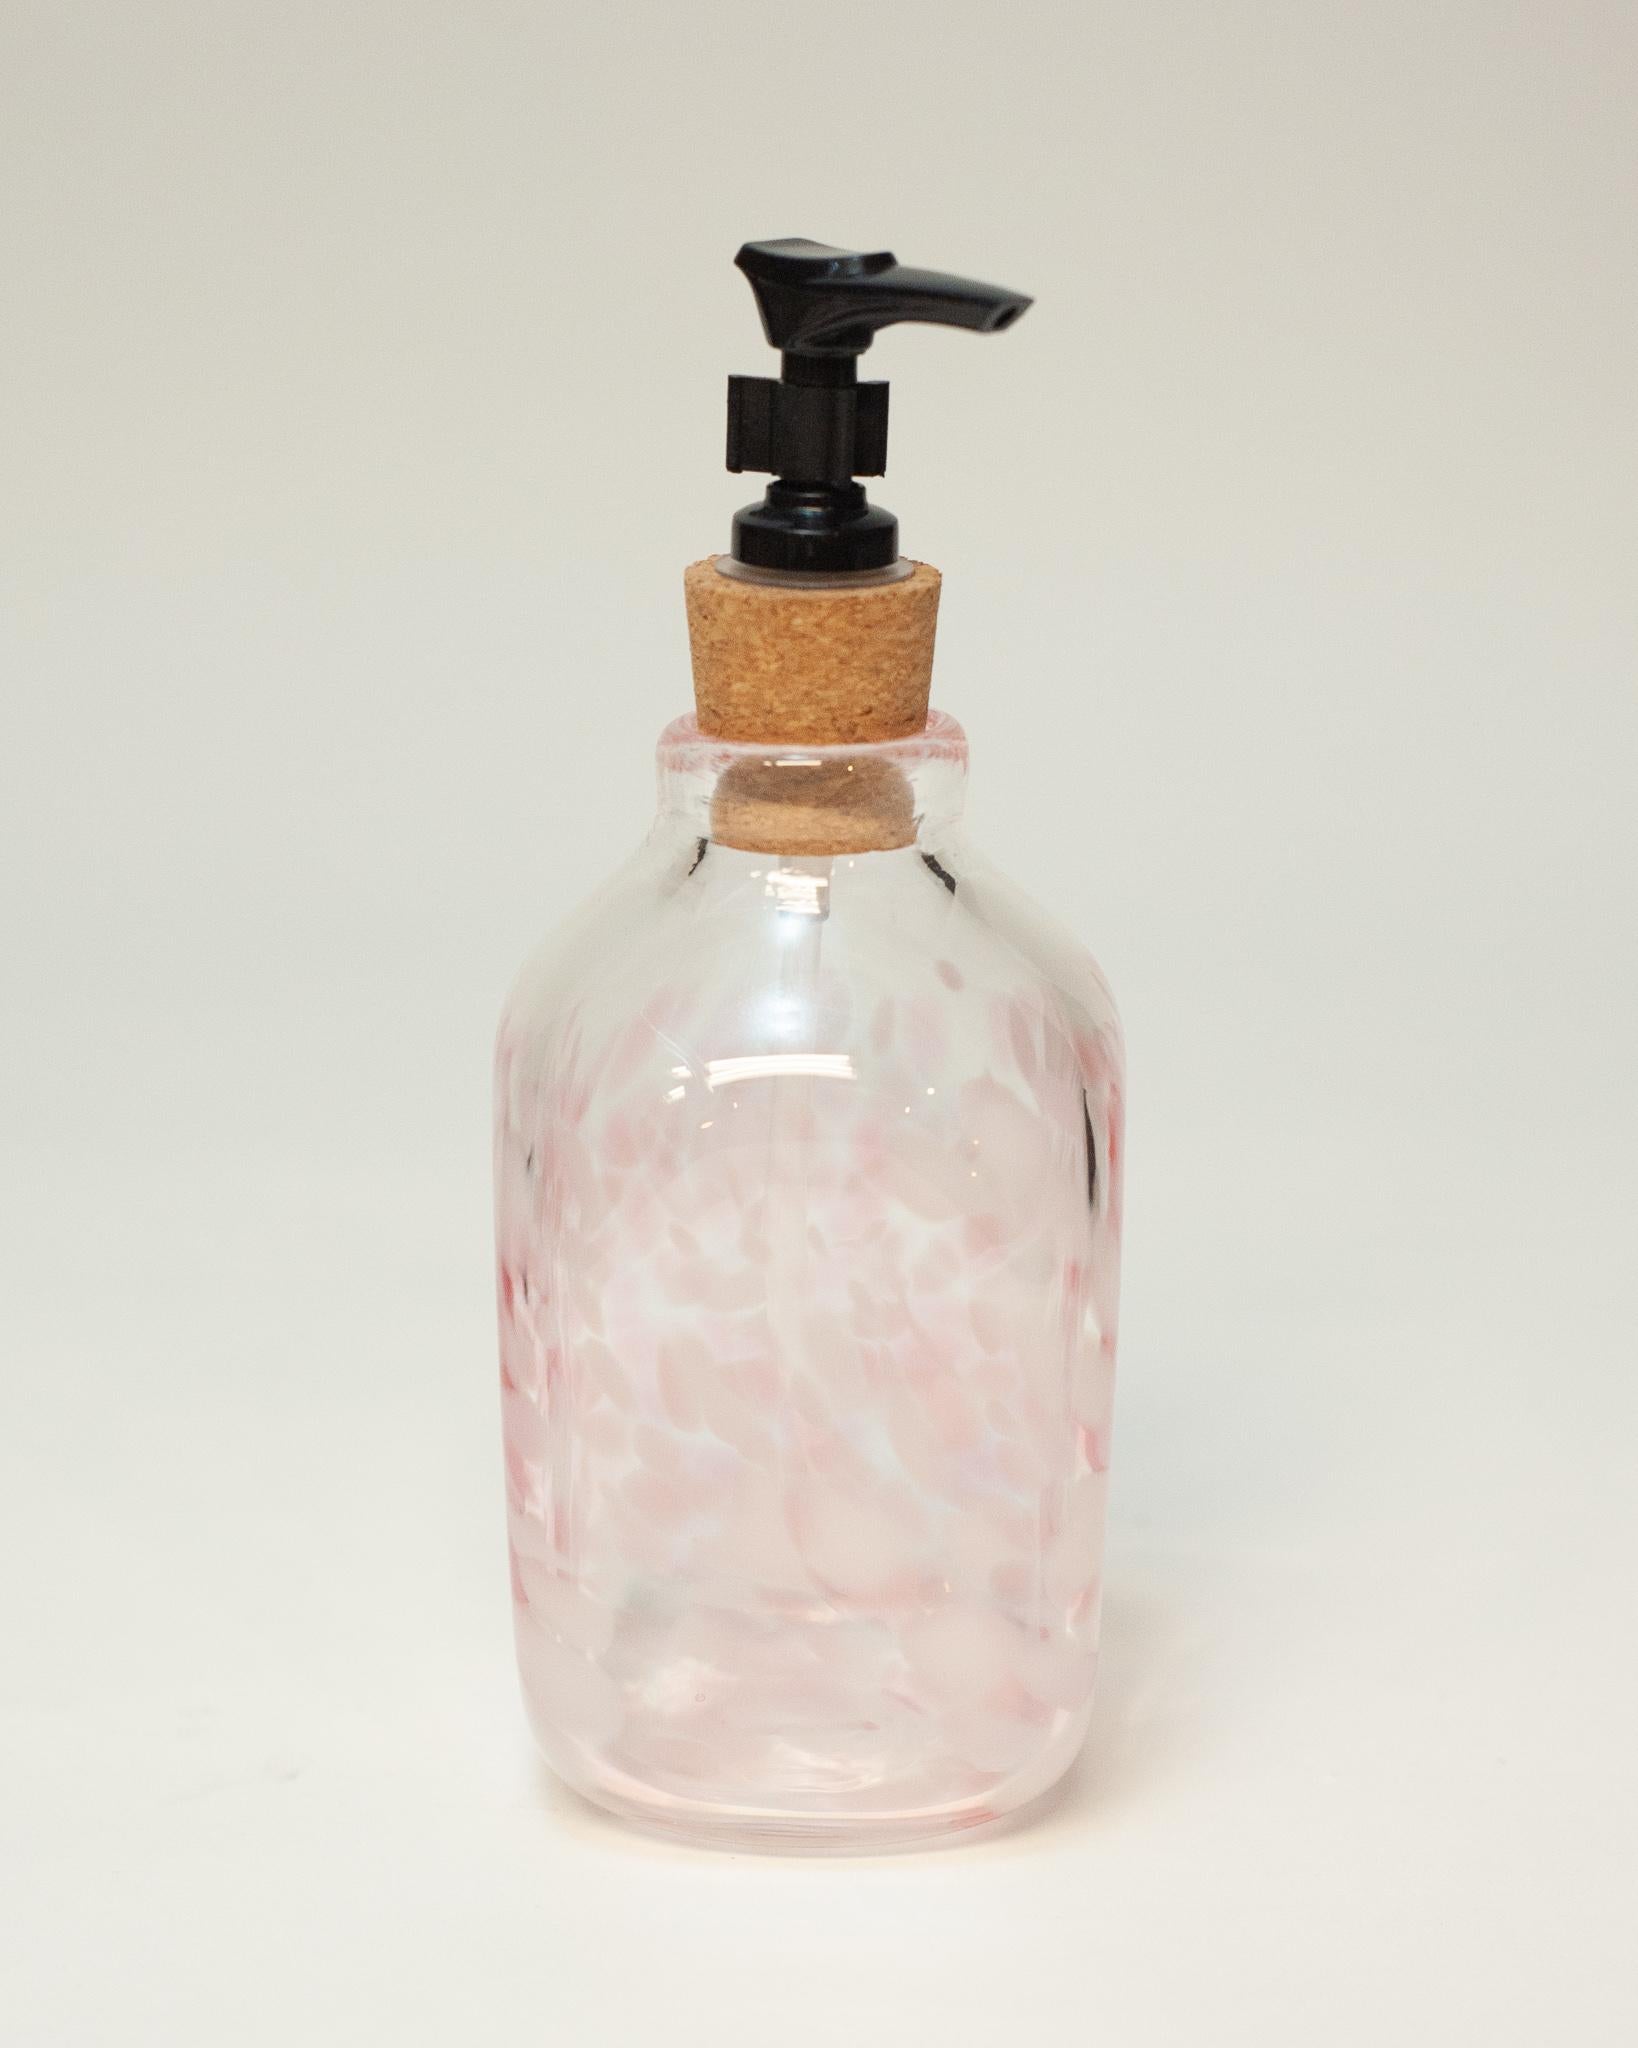 A stunning contemporary small pink tonal blown glass soap dispenser by a Canadian artist.